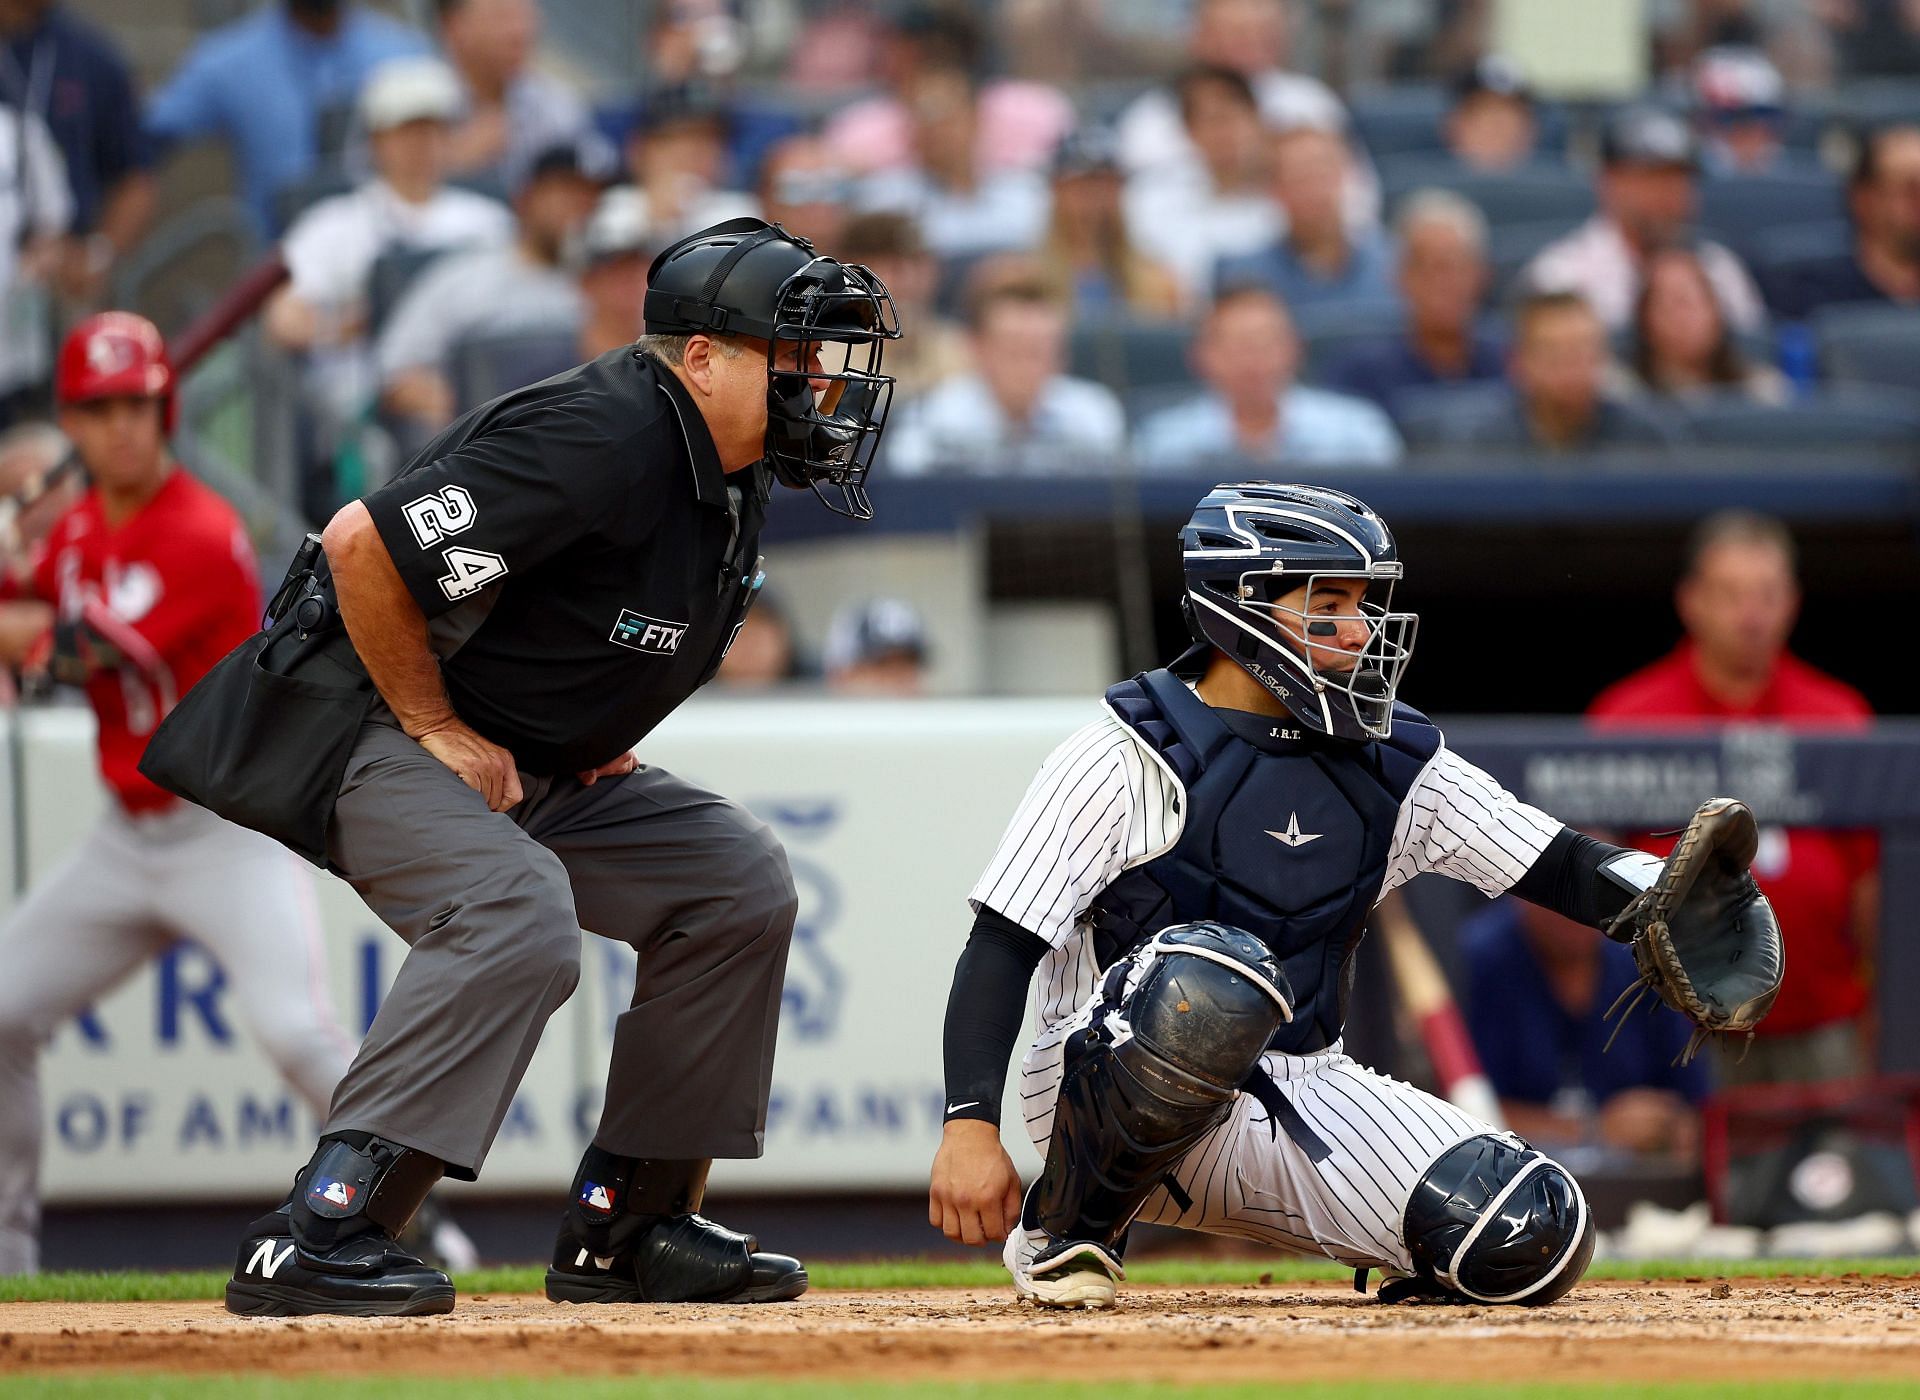 Pitch-framing Yankees catchers want no part of robo umps